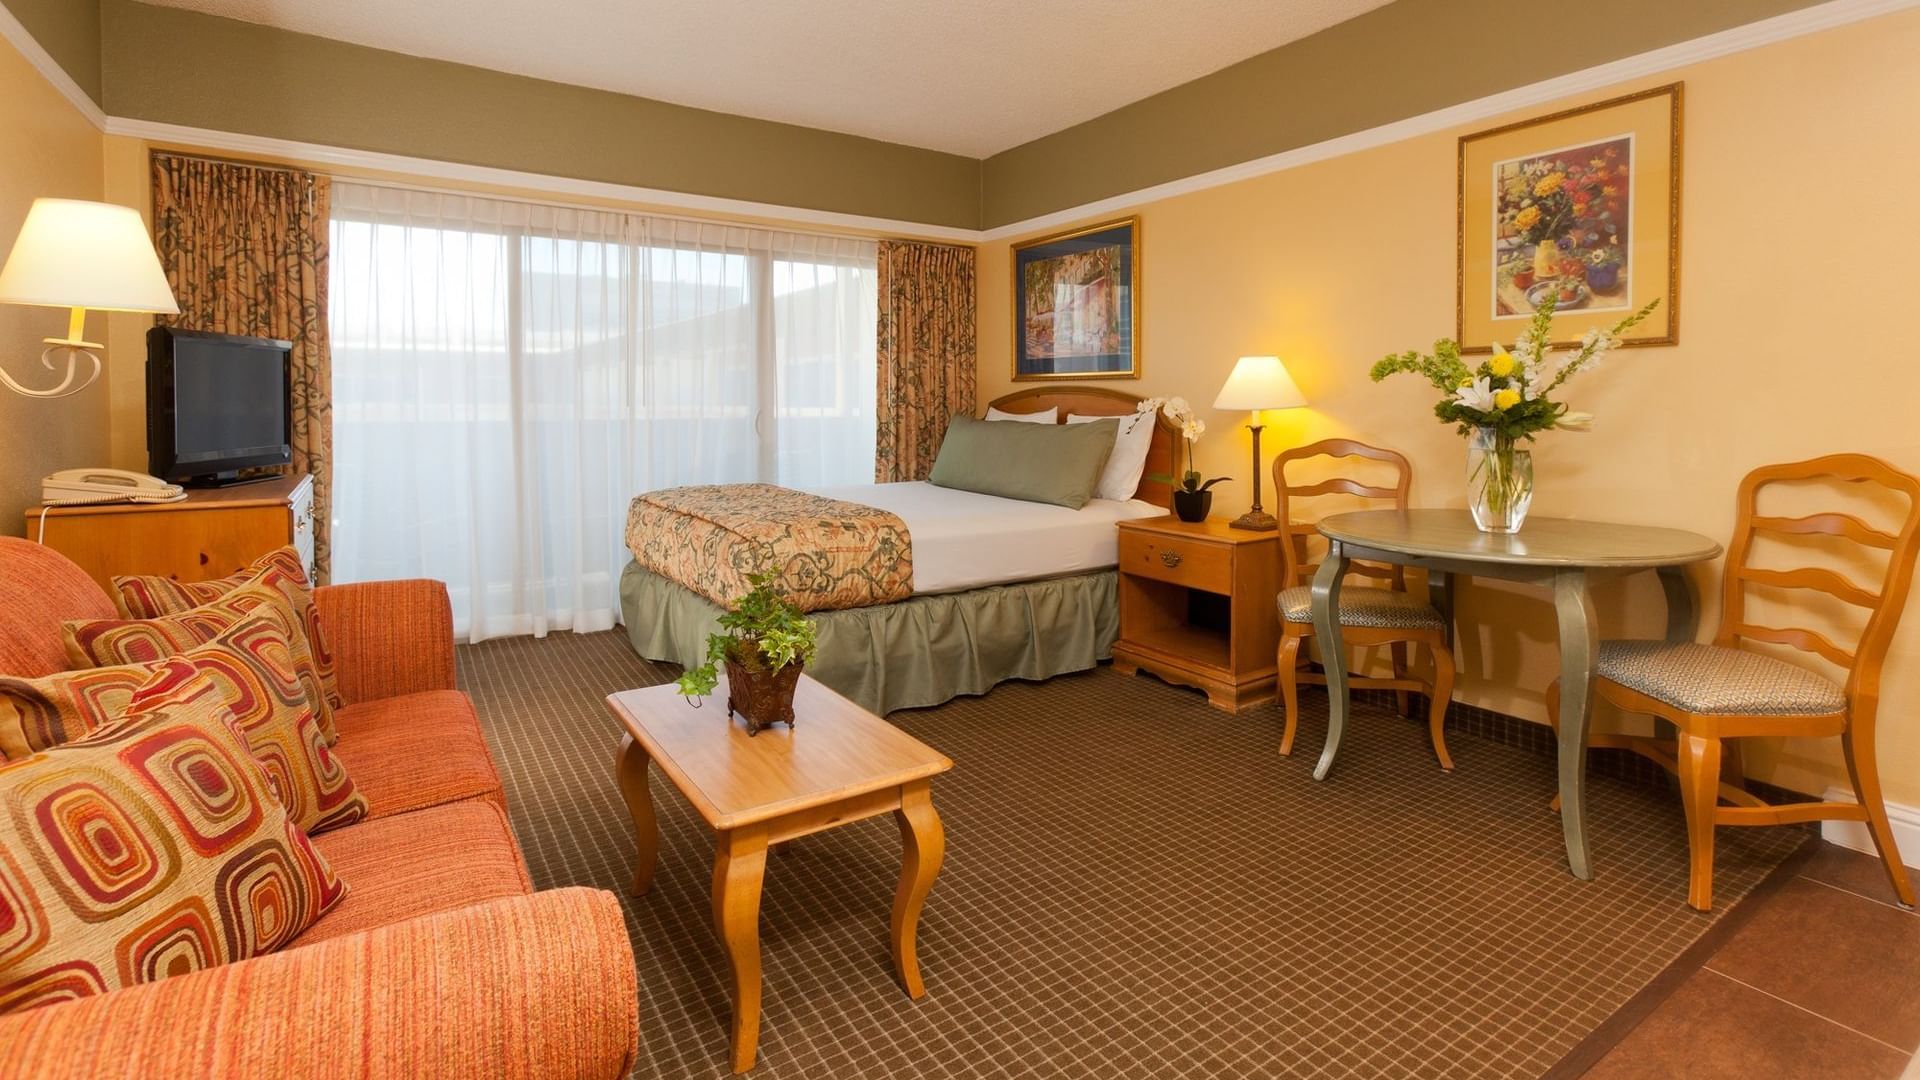  Rooms and Suites - Legacy Vacation Resorts  